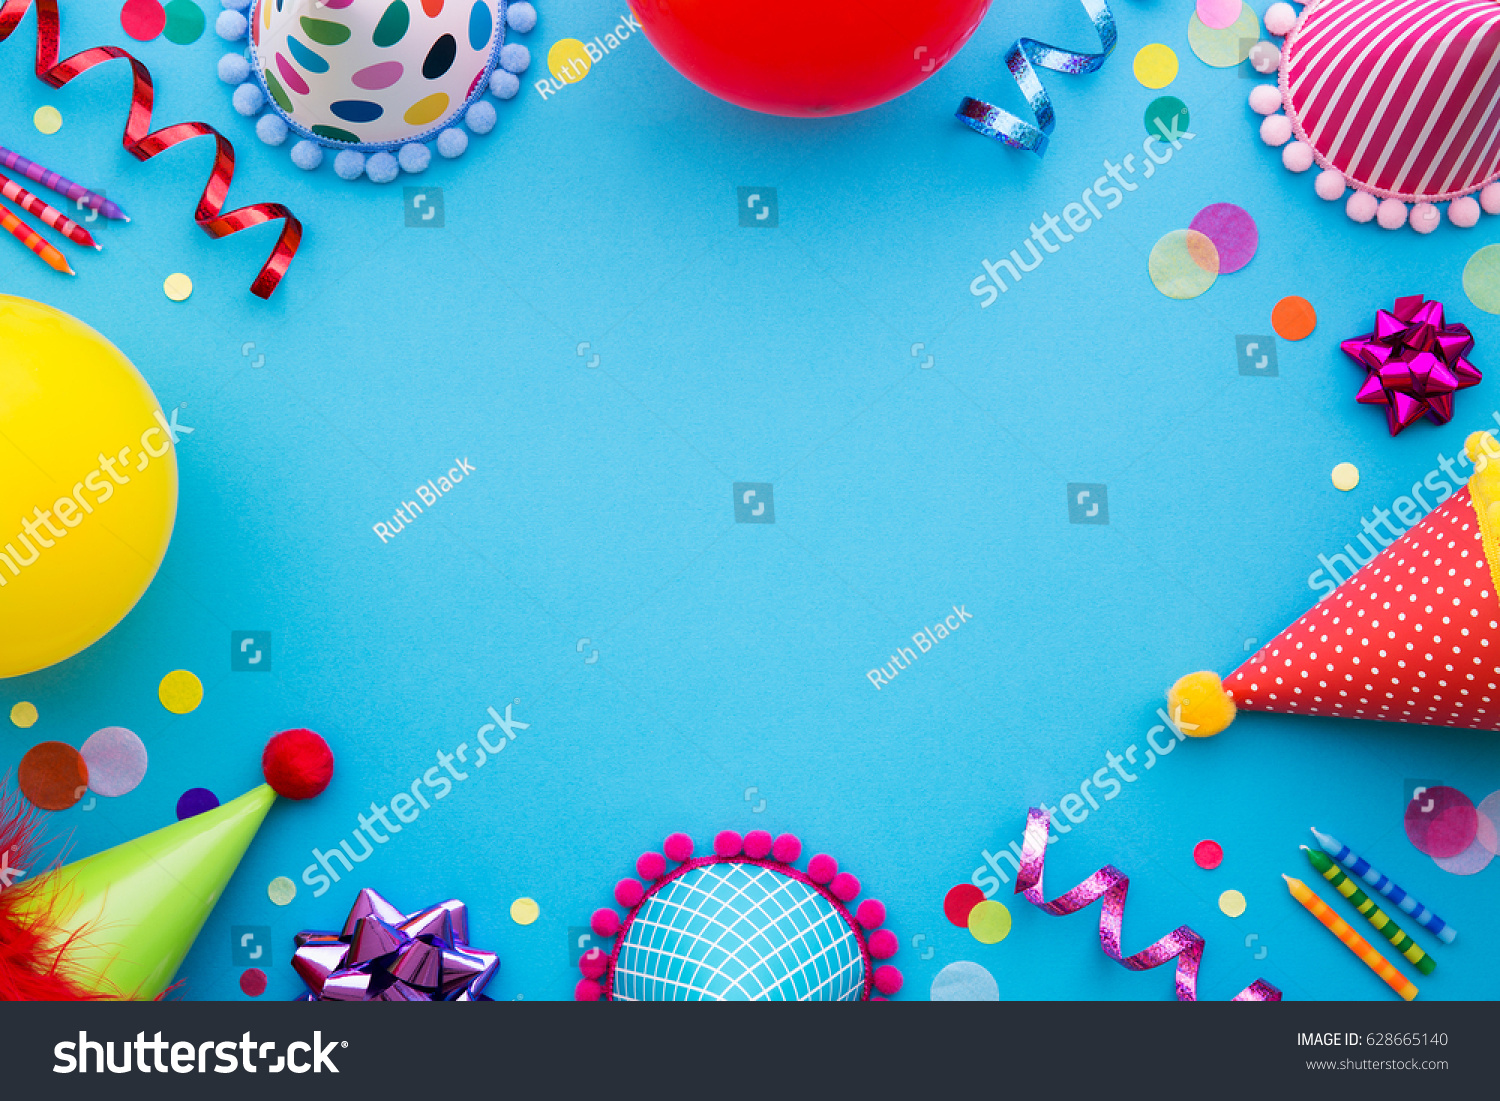 Birthday party background with party hats and streamers #628665140